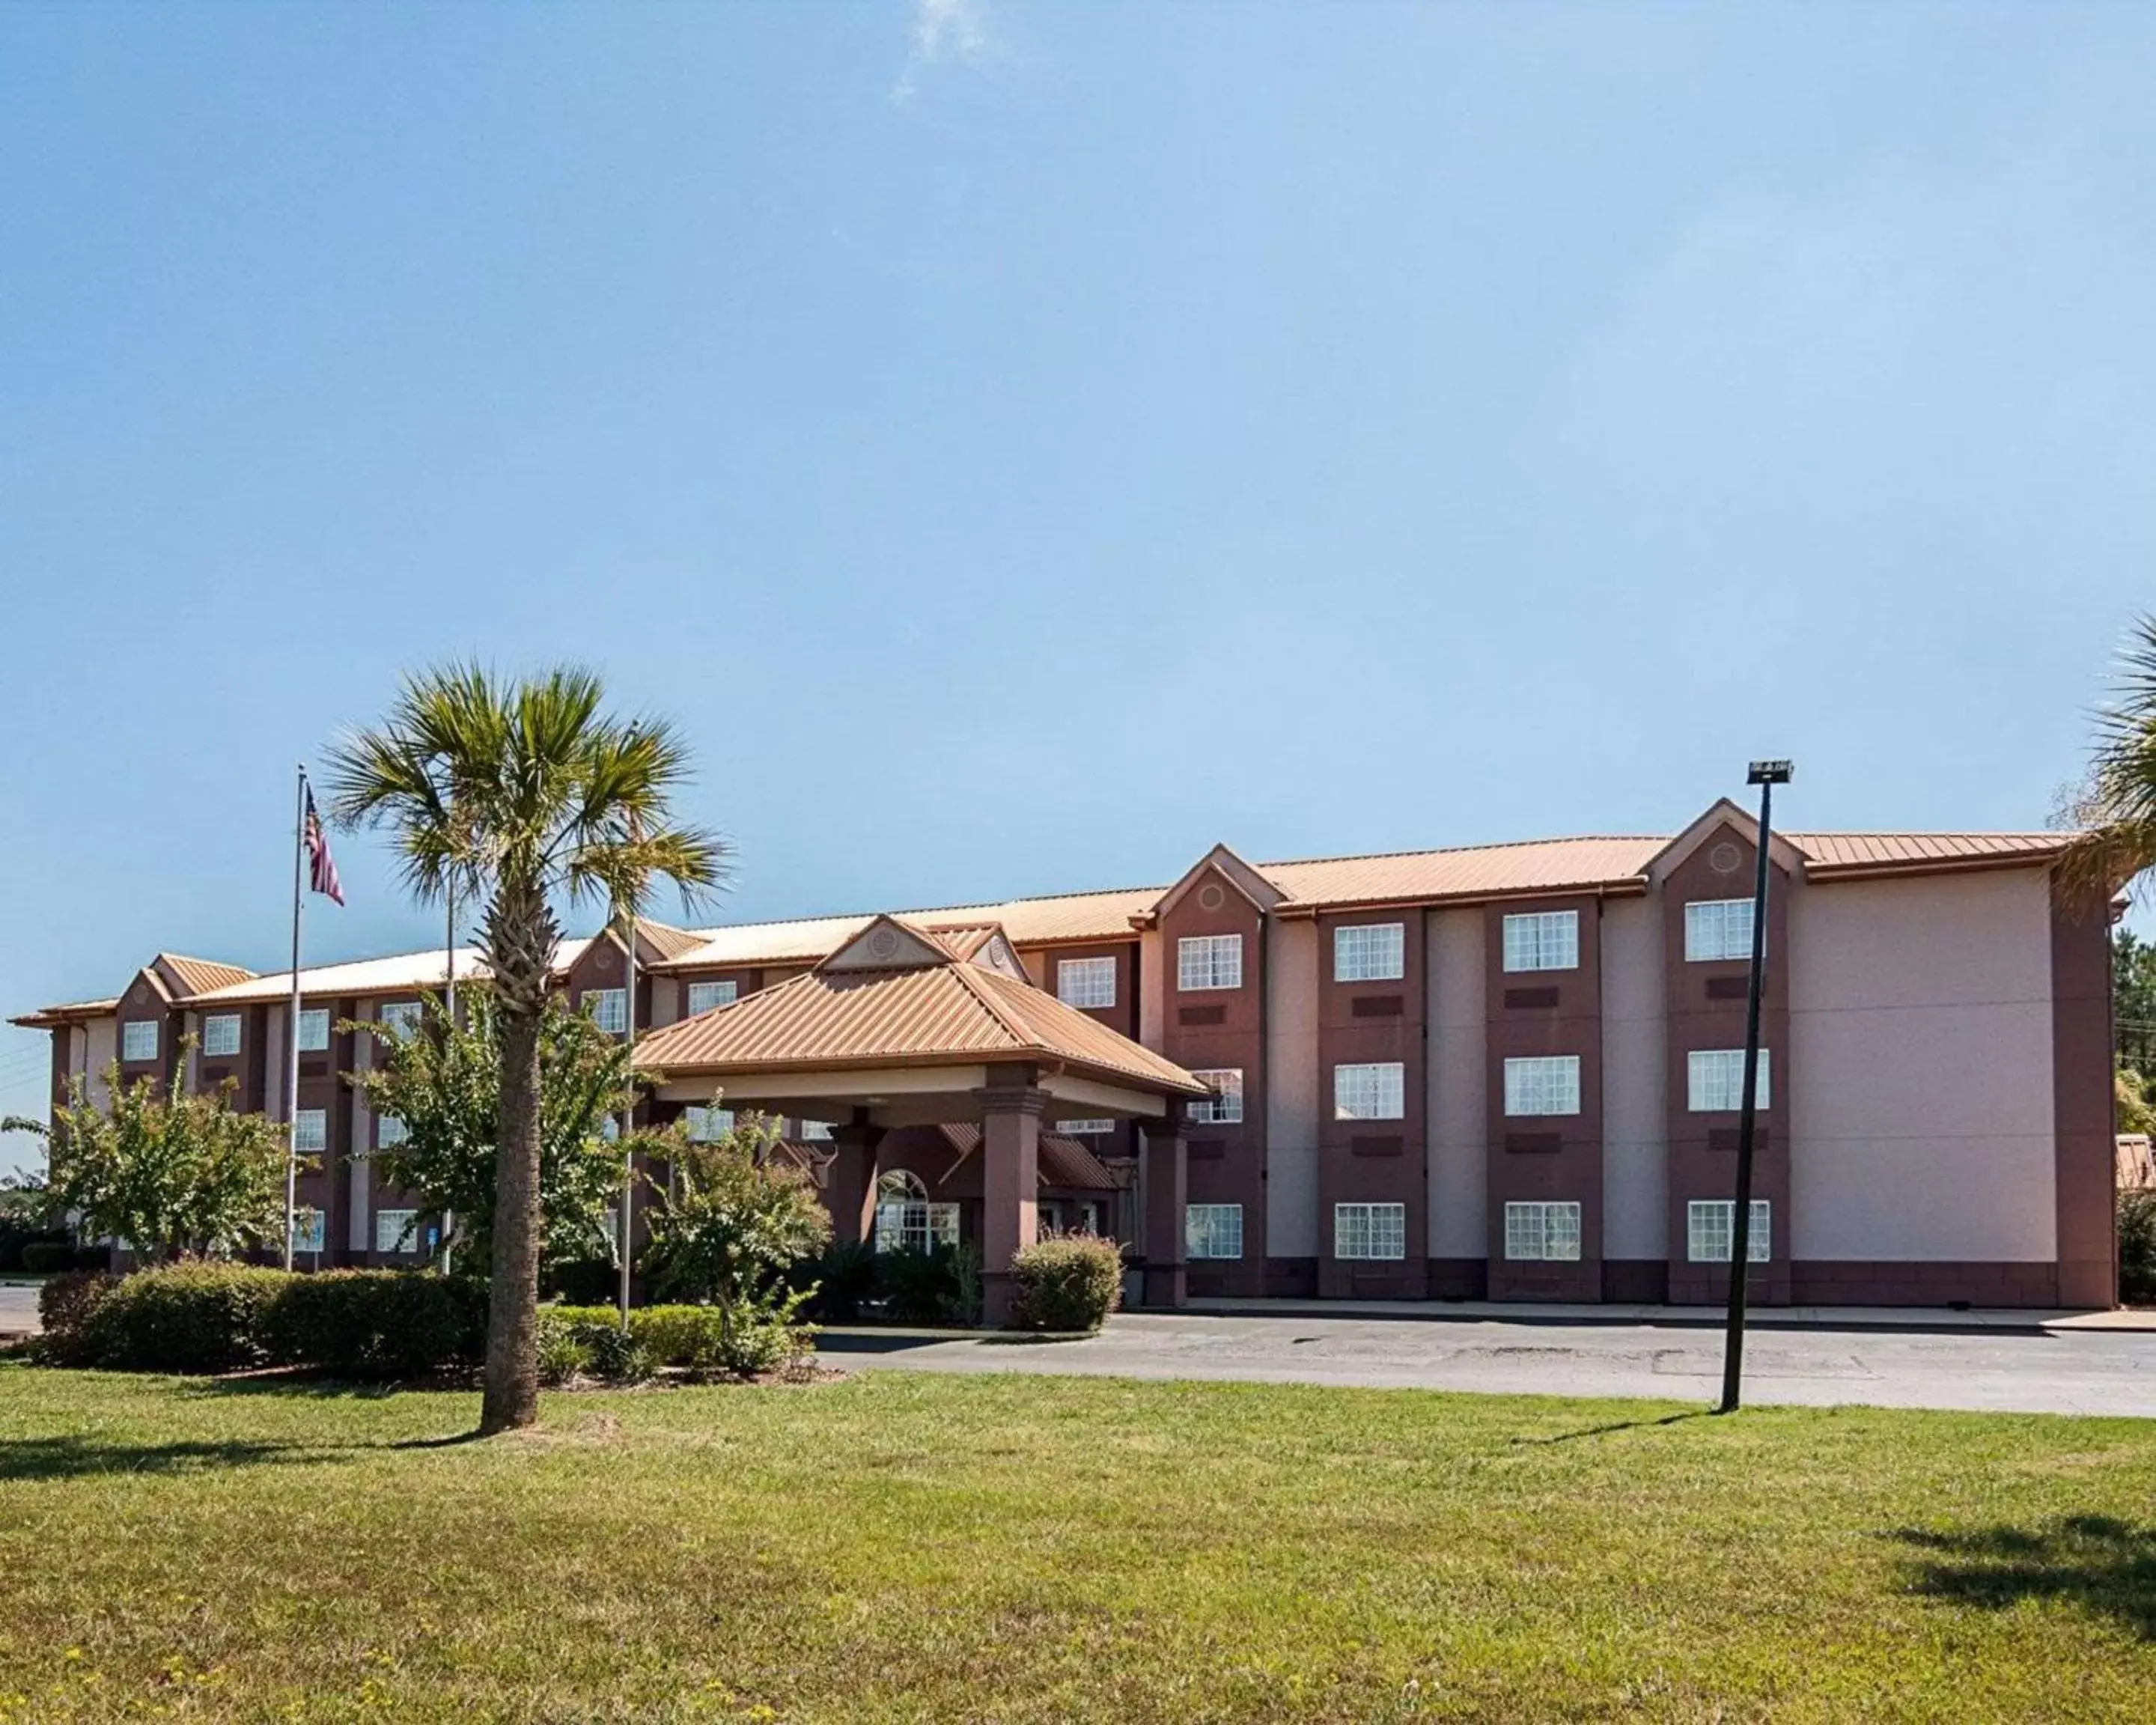 Property Building in Econo Lodge Inn & Suites Natchitoches